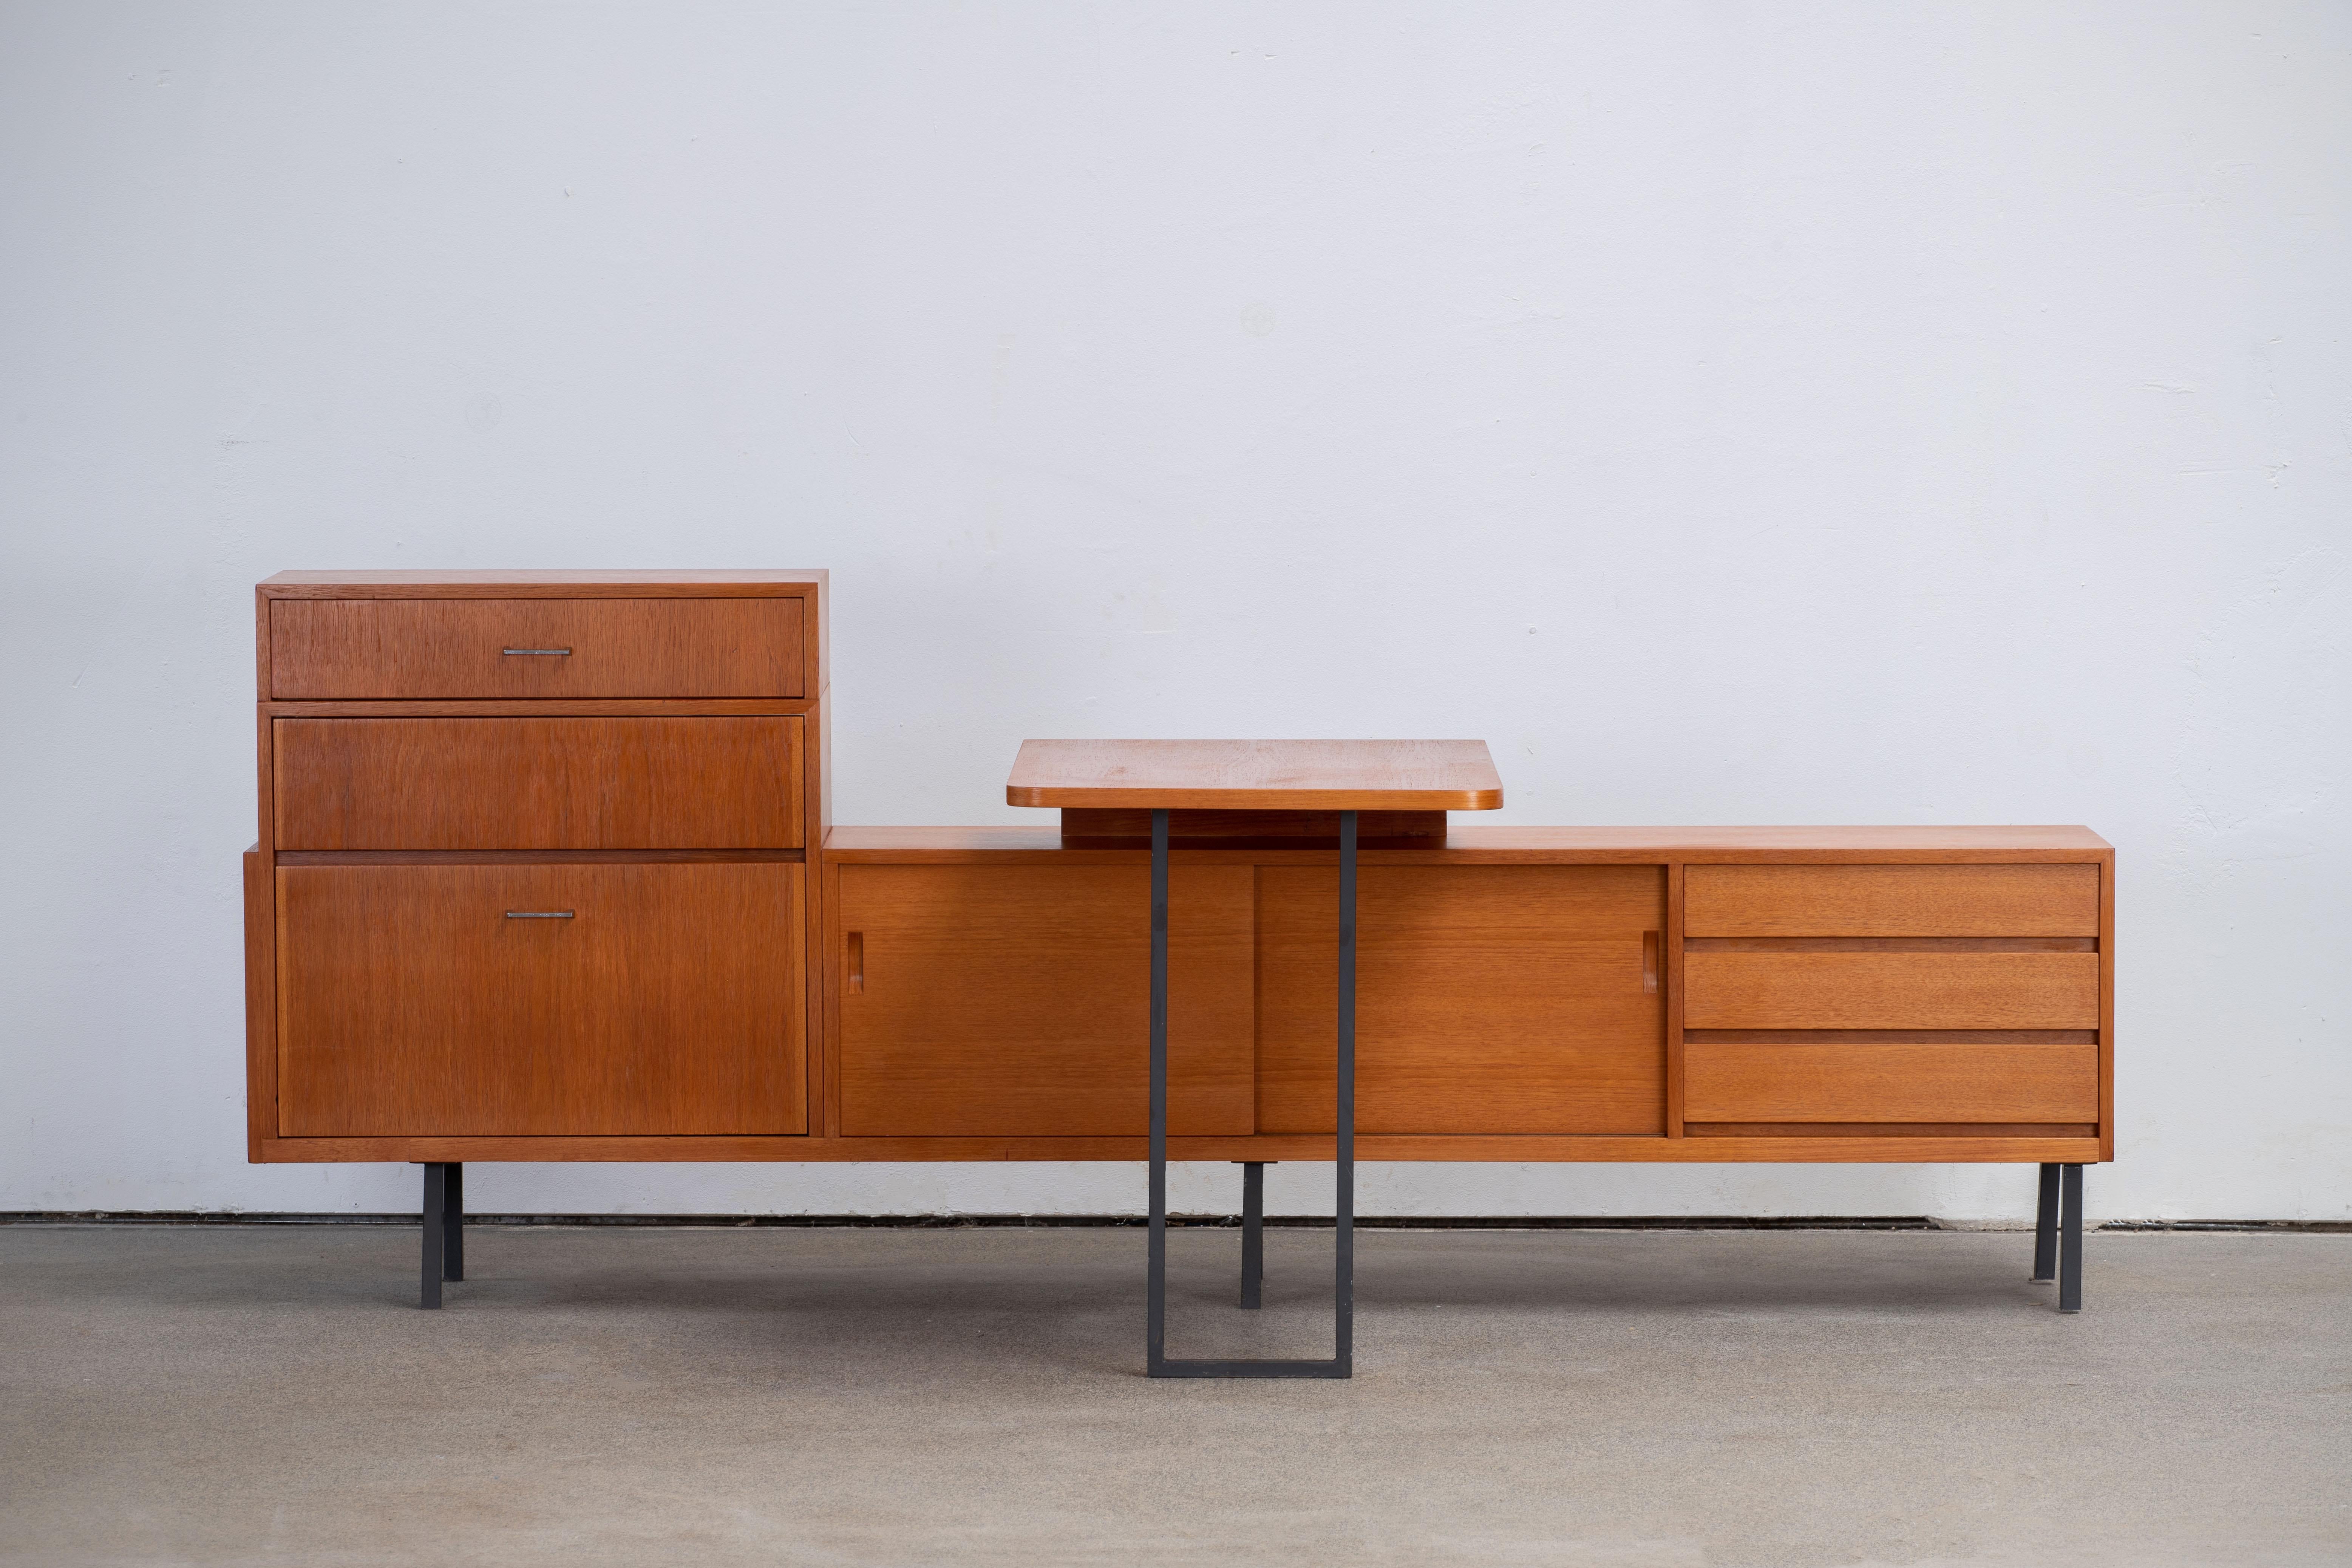 Mid-century sideboard in teak, Germany, 1960s.
This sideboard can evolve in a corner desk, a removable table can be added to it, making of this minimal sideboard a versatile object.
An elegant piece.
Good condition with minor wear.